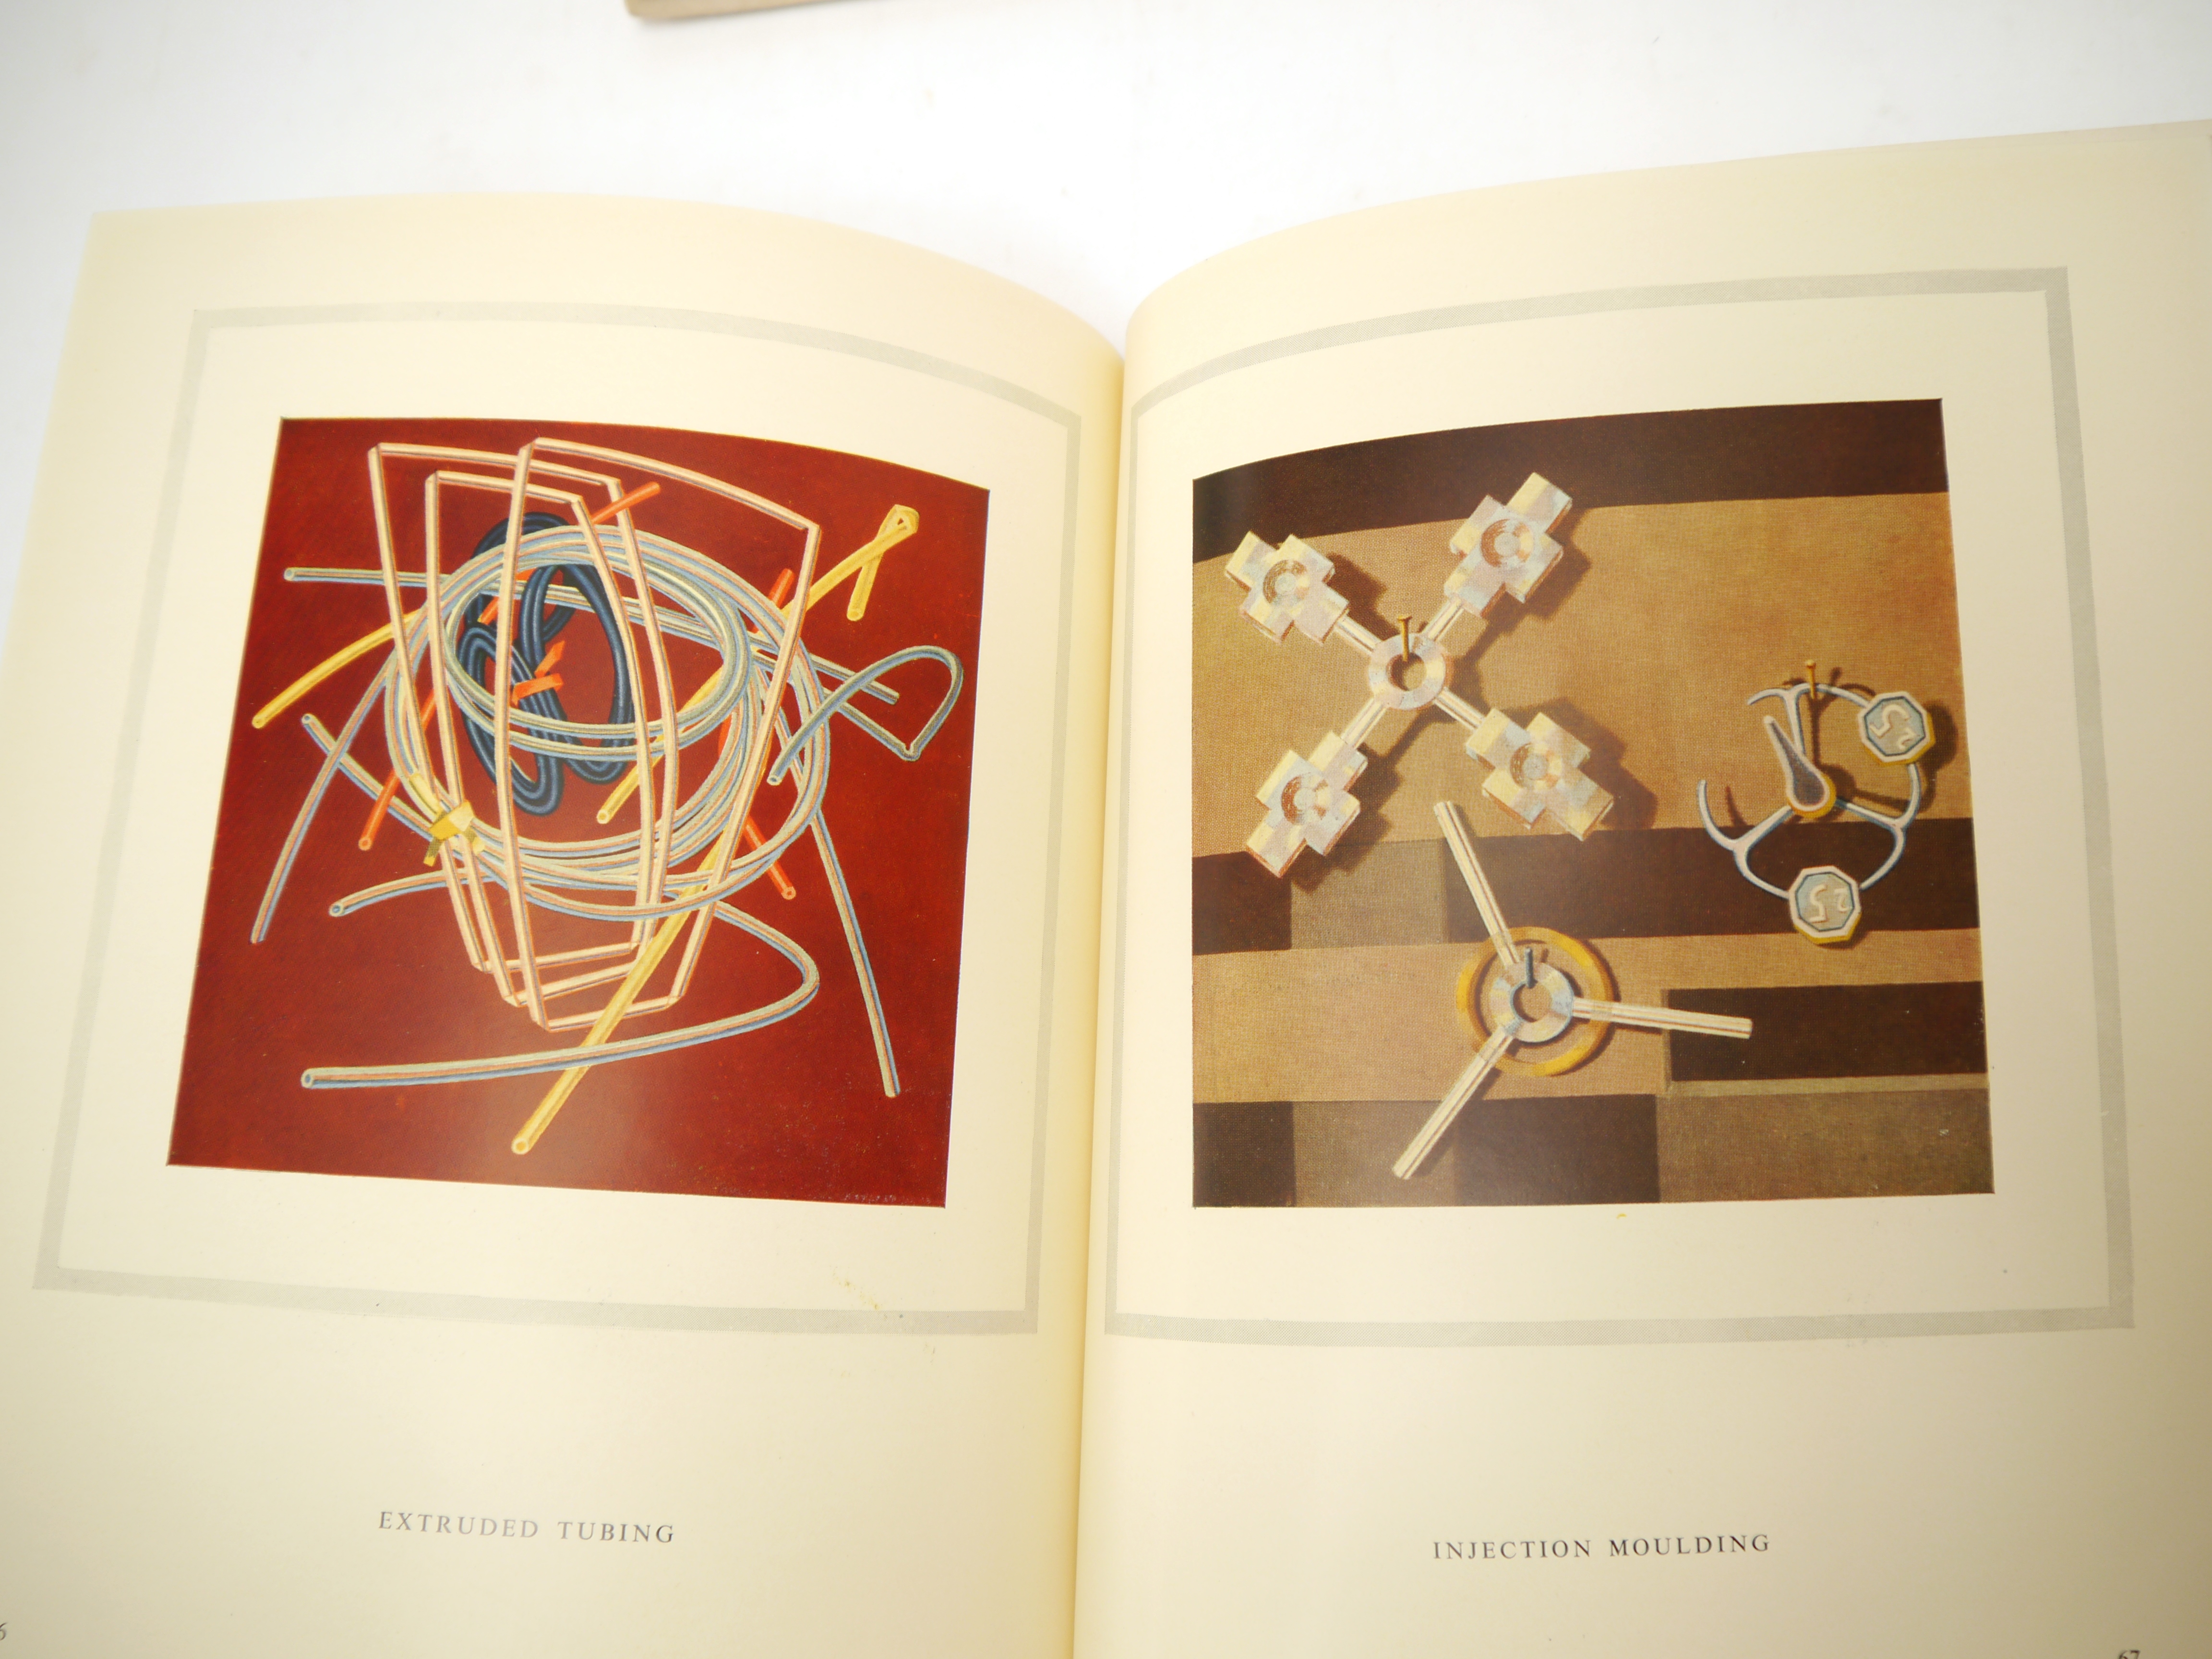 (Typography, Printing, Illustration, Early Ian Fleming in Print.), 'Alphabet & Image', Shenval - Image 29 of 31